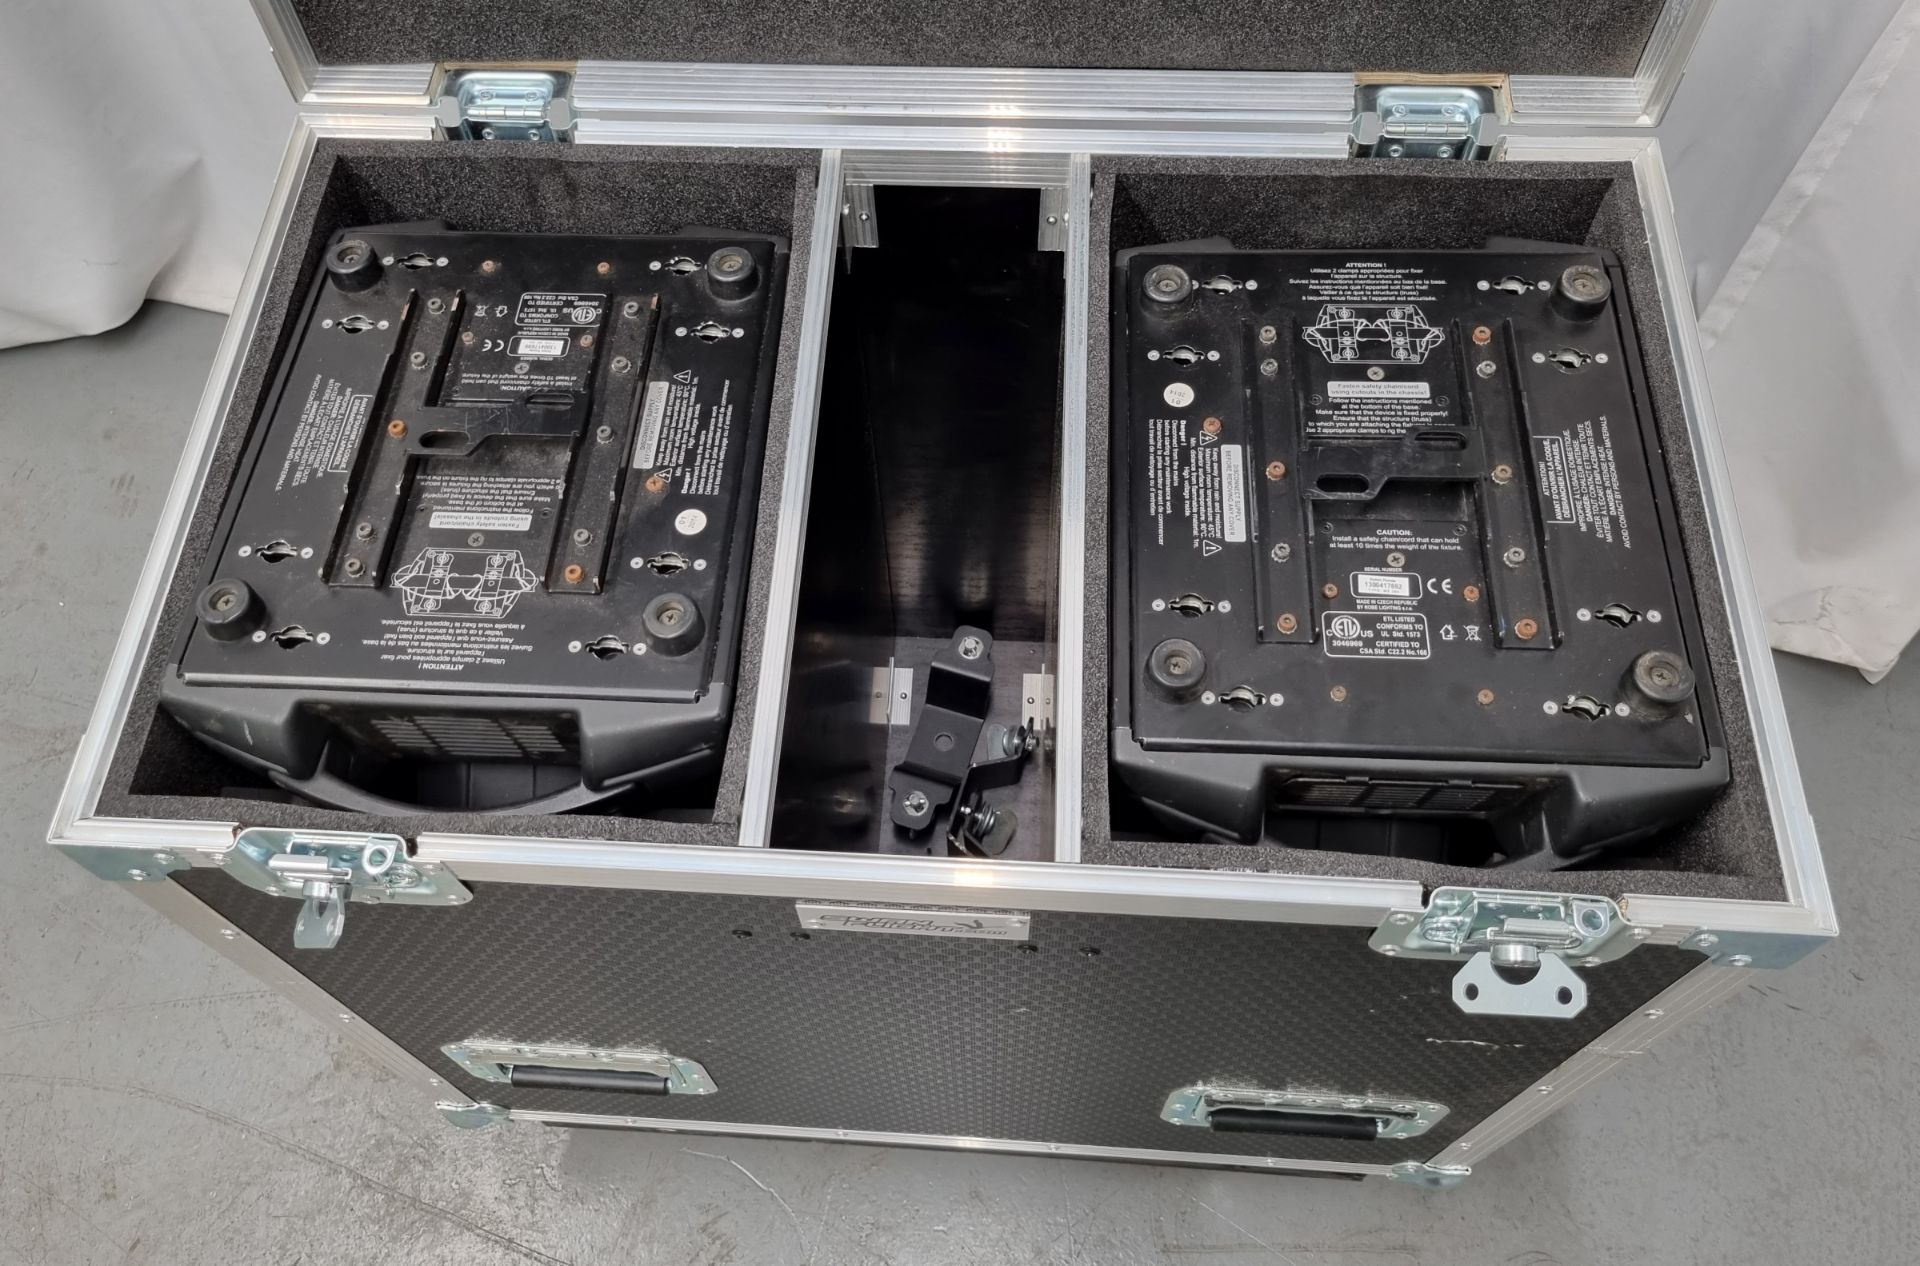 2x Robe RNS2 pointe all-in-one moving lights in flight case, new lamps in both units - 1 FAULTY - Image 10 of 11